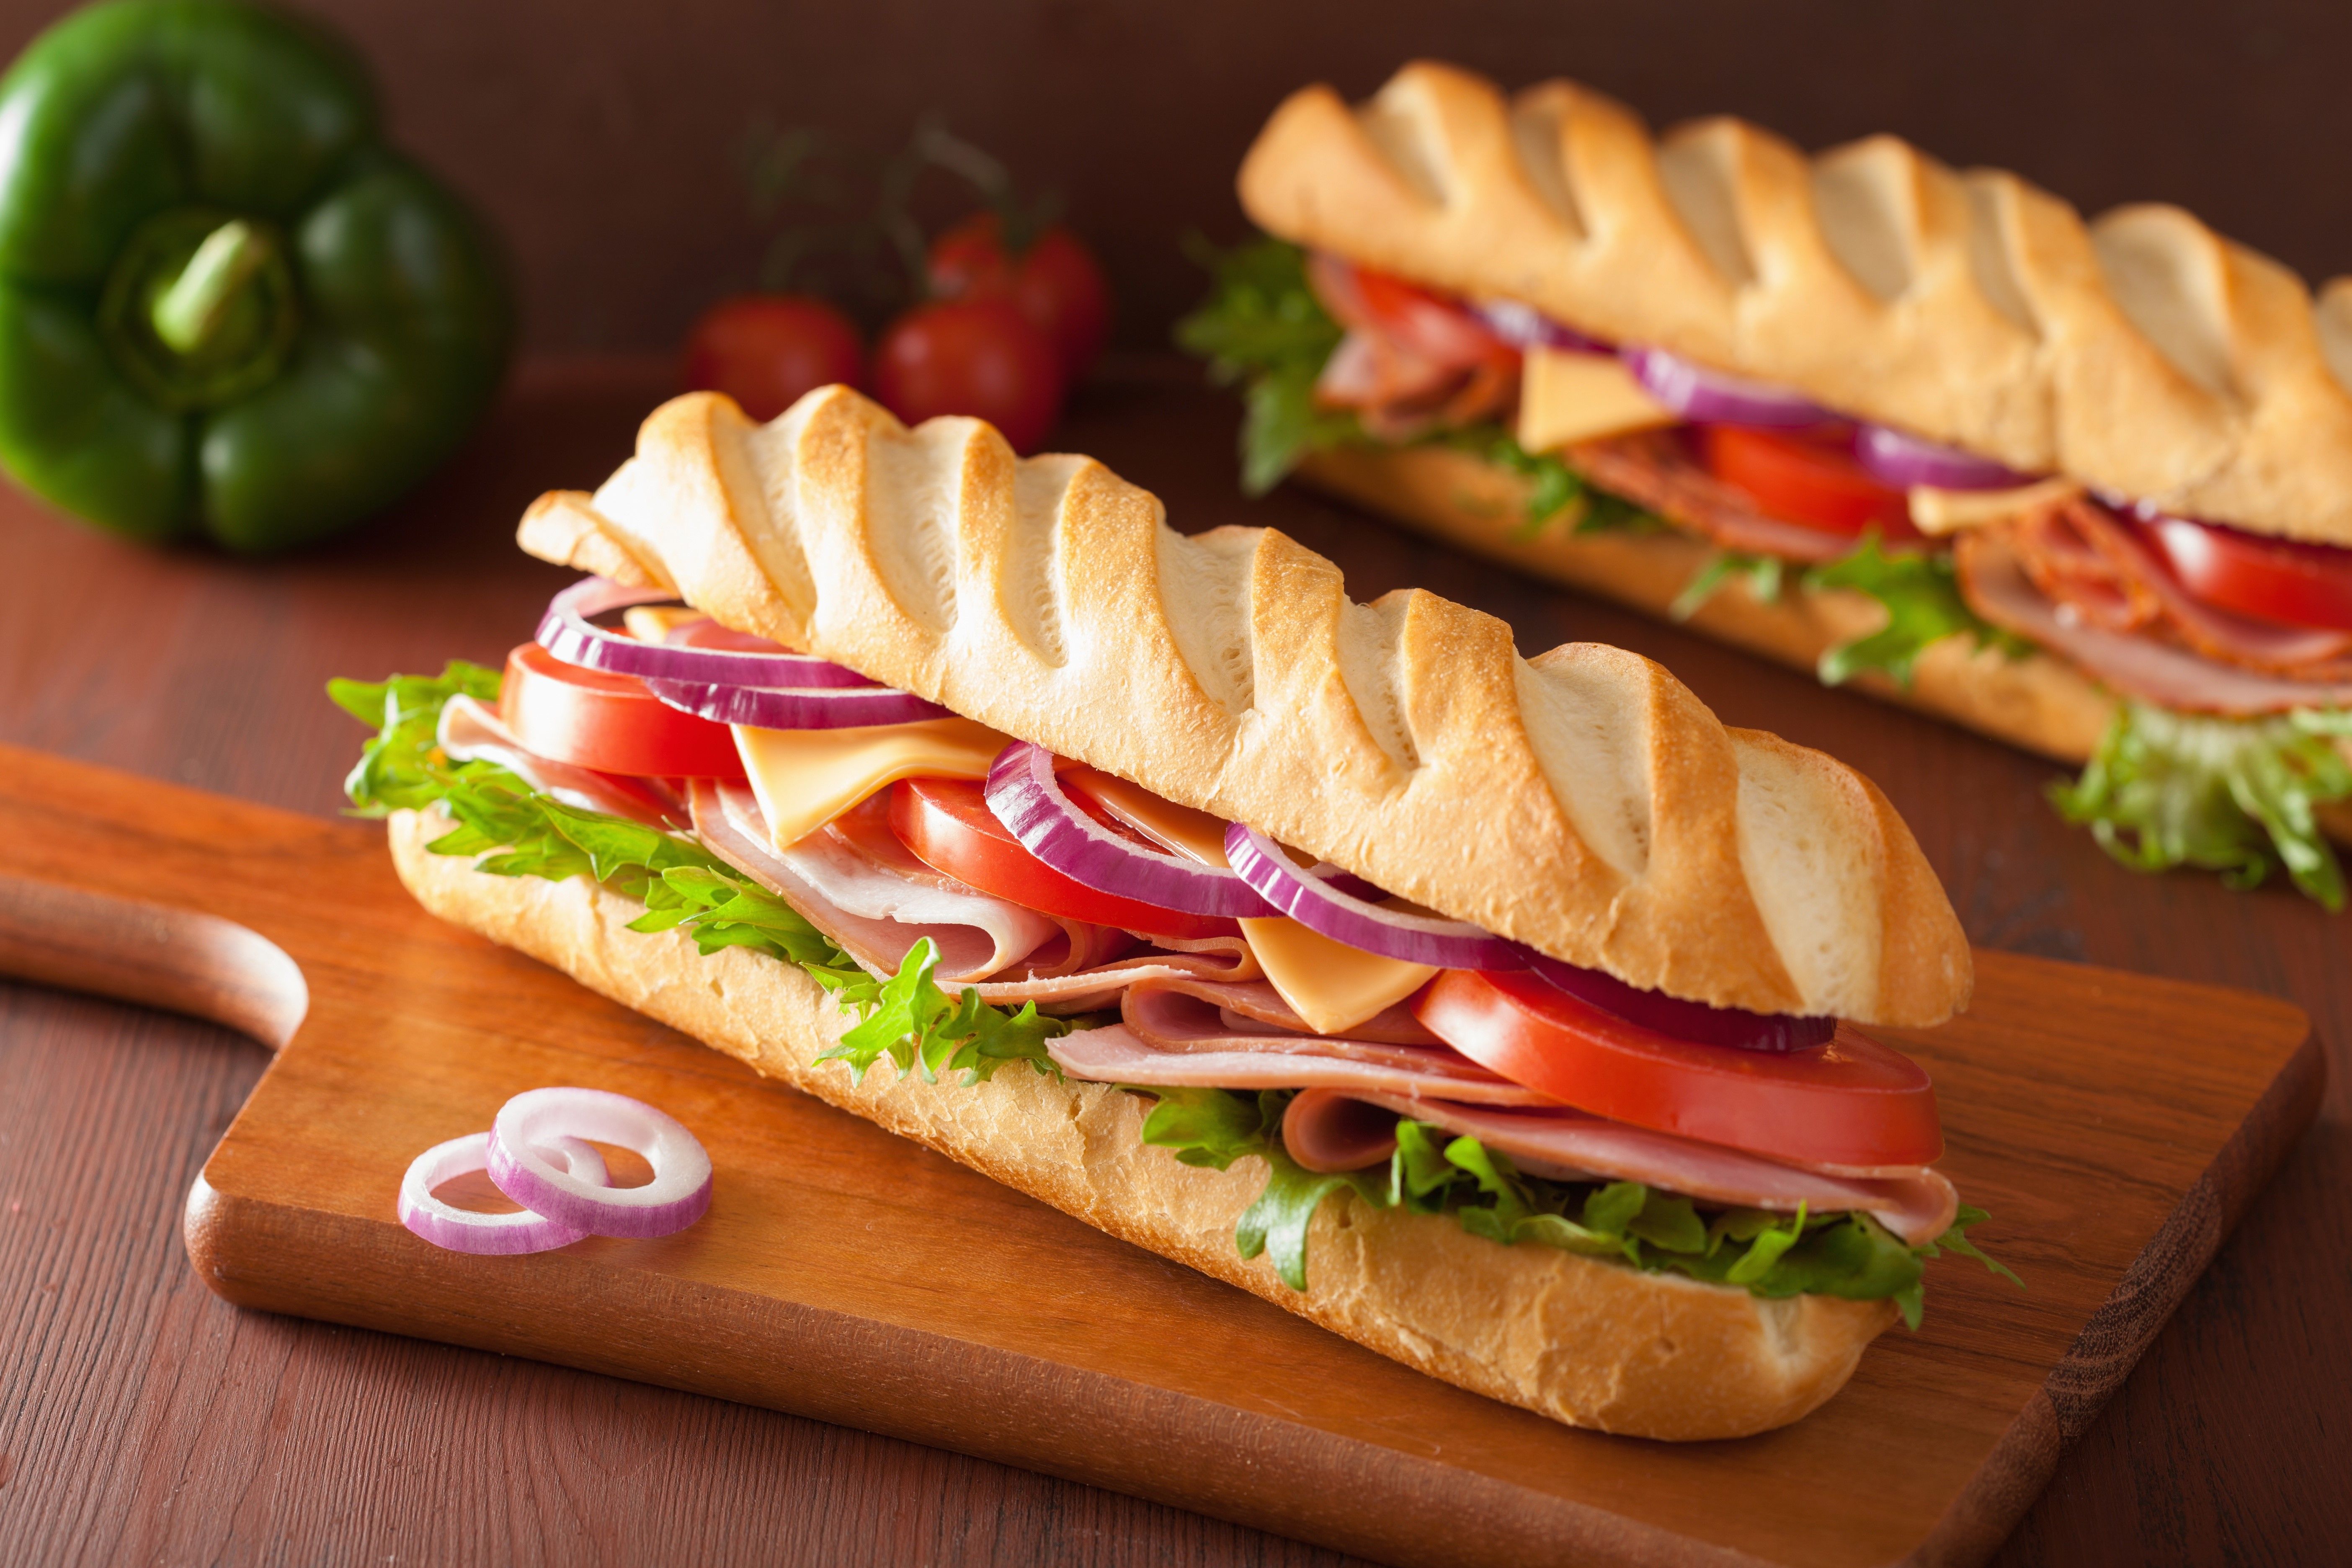 Wallpaper / food, baguette, ham, tomatoes, salad, cheese, bell peppers, onion rings, lettuce